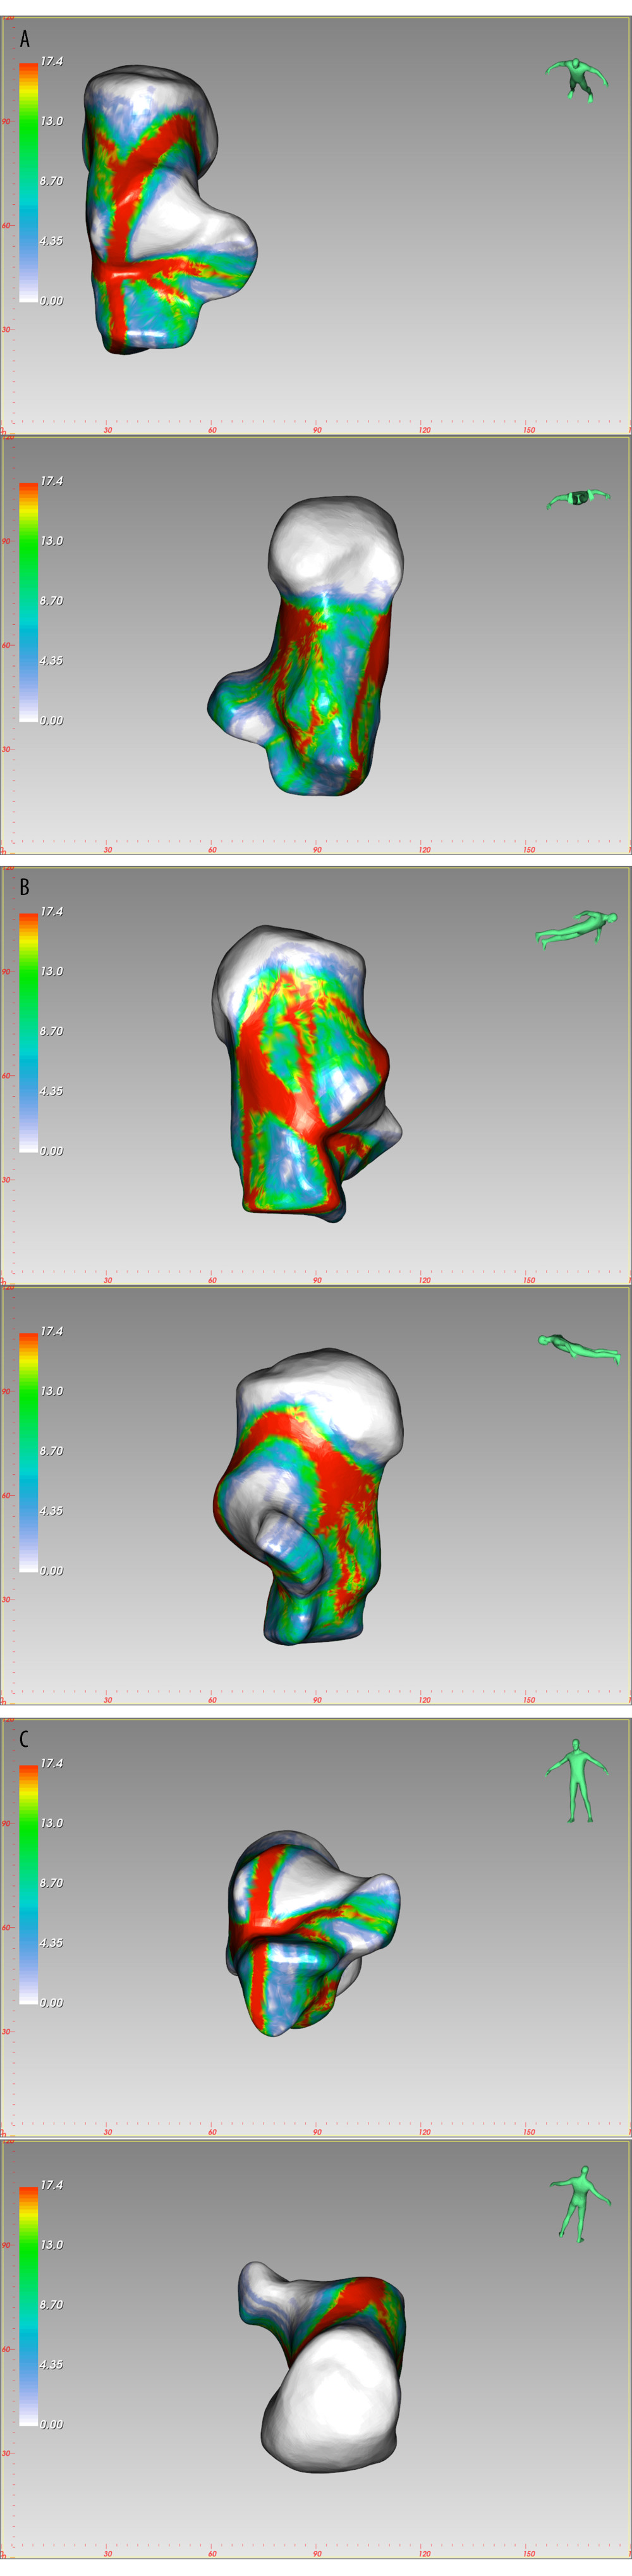 The fracture heatmap distribution of Sanders type 2A joint depression fracture, created by E-3D Medical 18.01 software (Central South University, Changsha, China). (A) Top view, Bottom view, (B) Lateral view, Medial view, (C) Front view, Rear view.